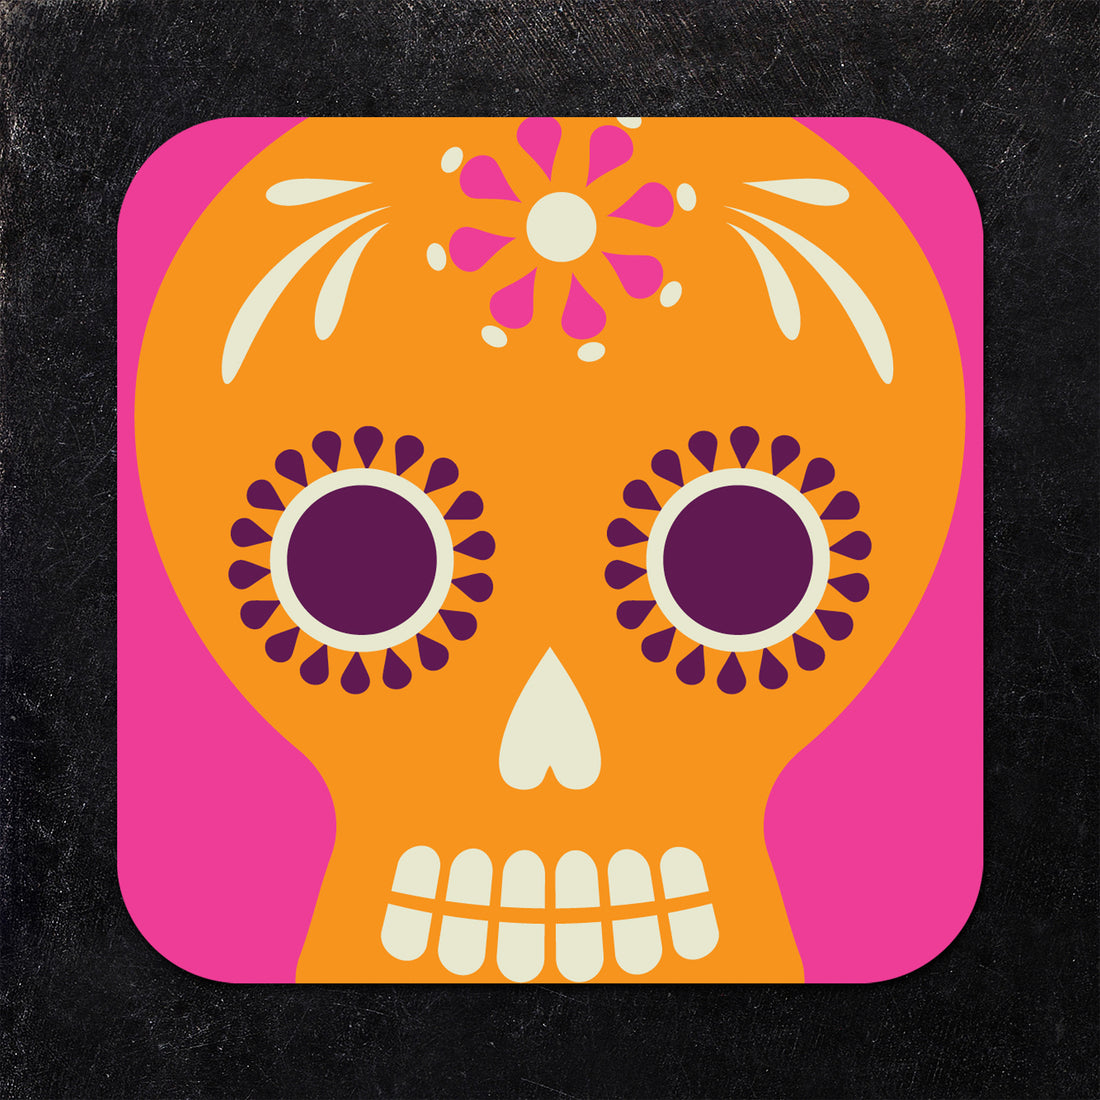 Coaster: Holiday, Day of the Dead Skulls - Pack of 6